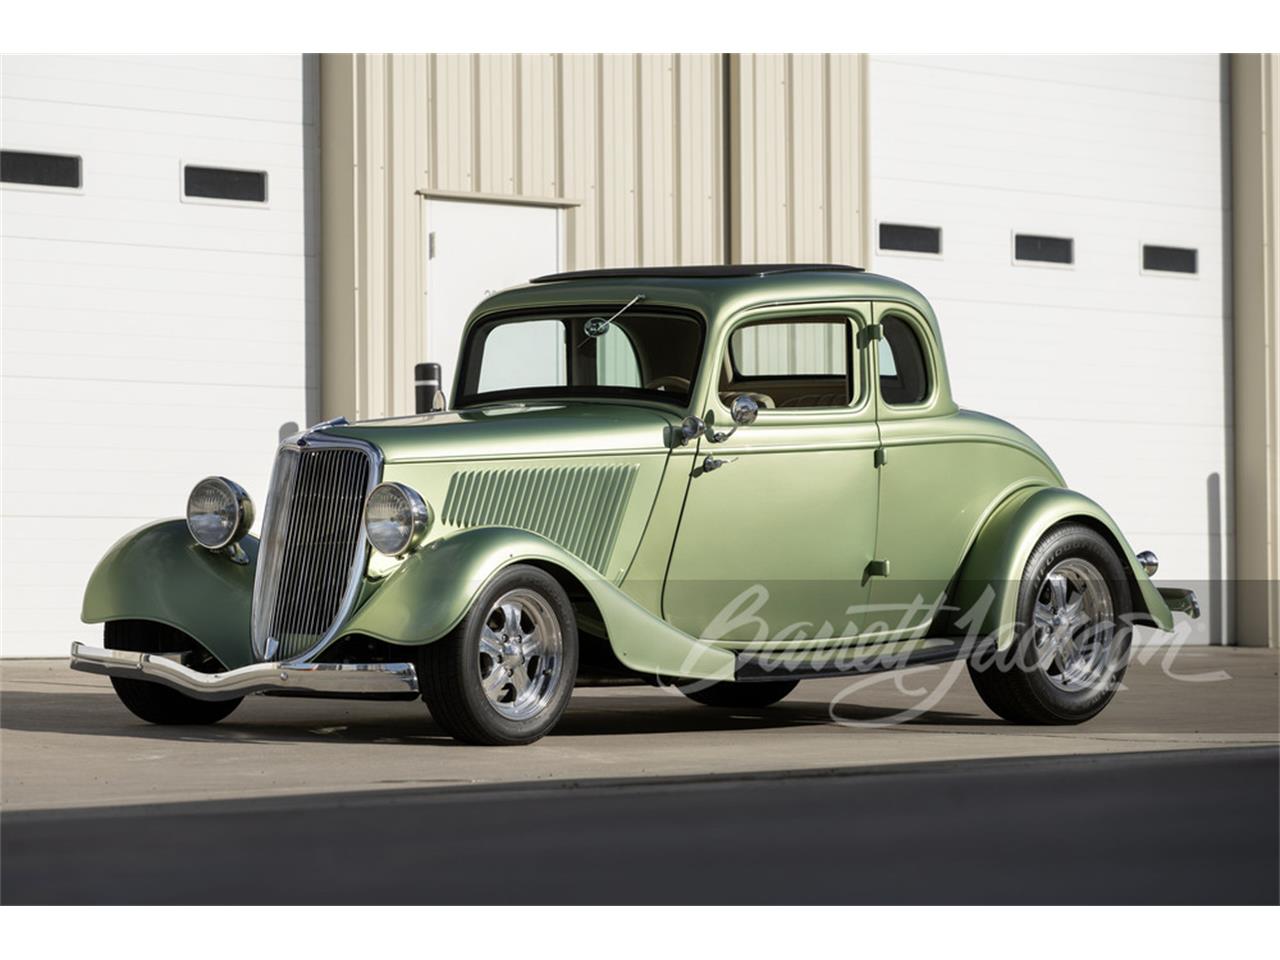 For Sale at Auction: 1934 Ford 5-Window Coupe in Scottsdale, Arizona for sale in Scottsdale, AZ